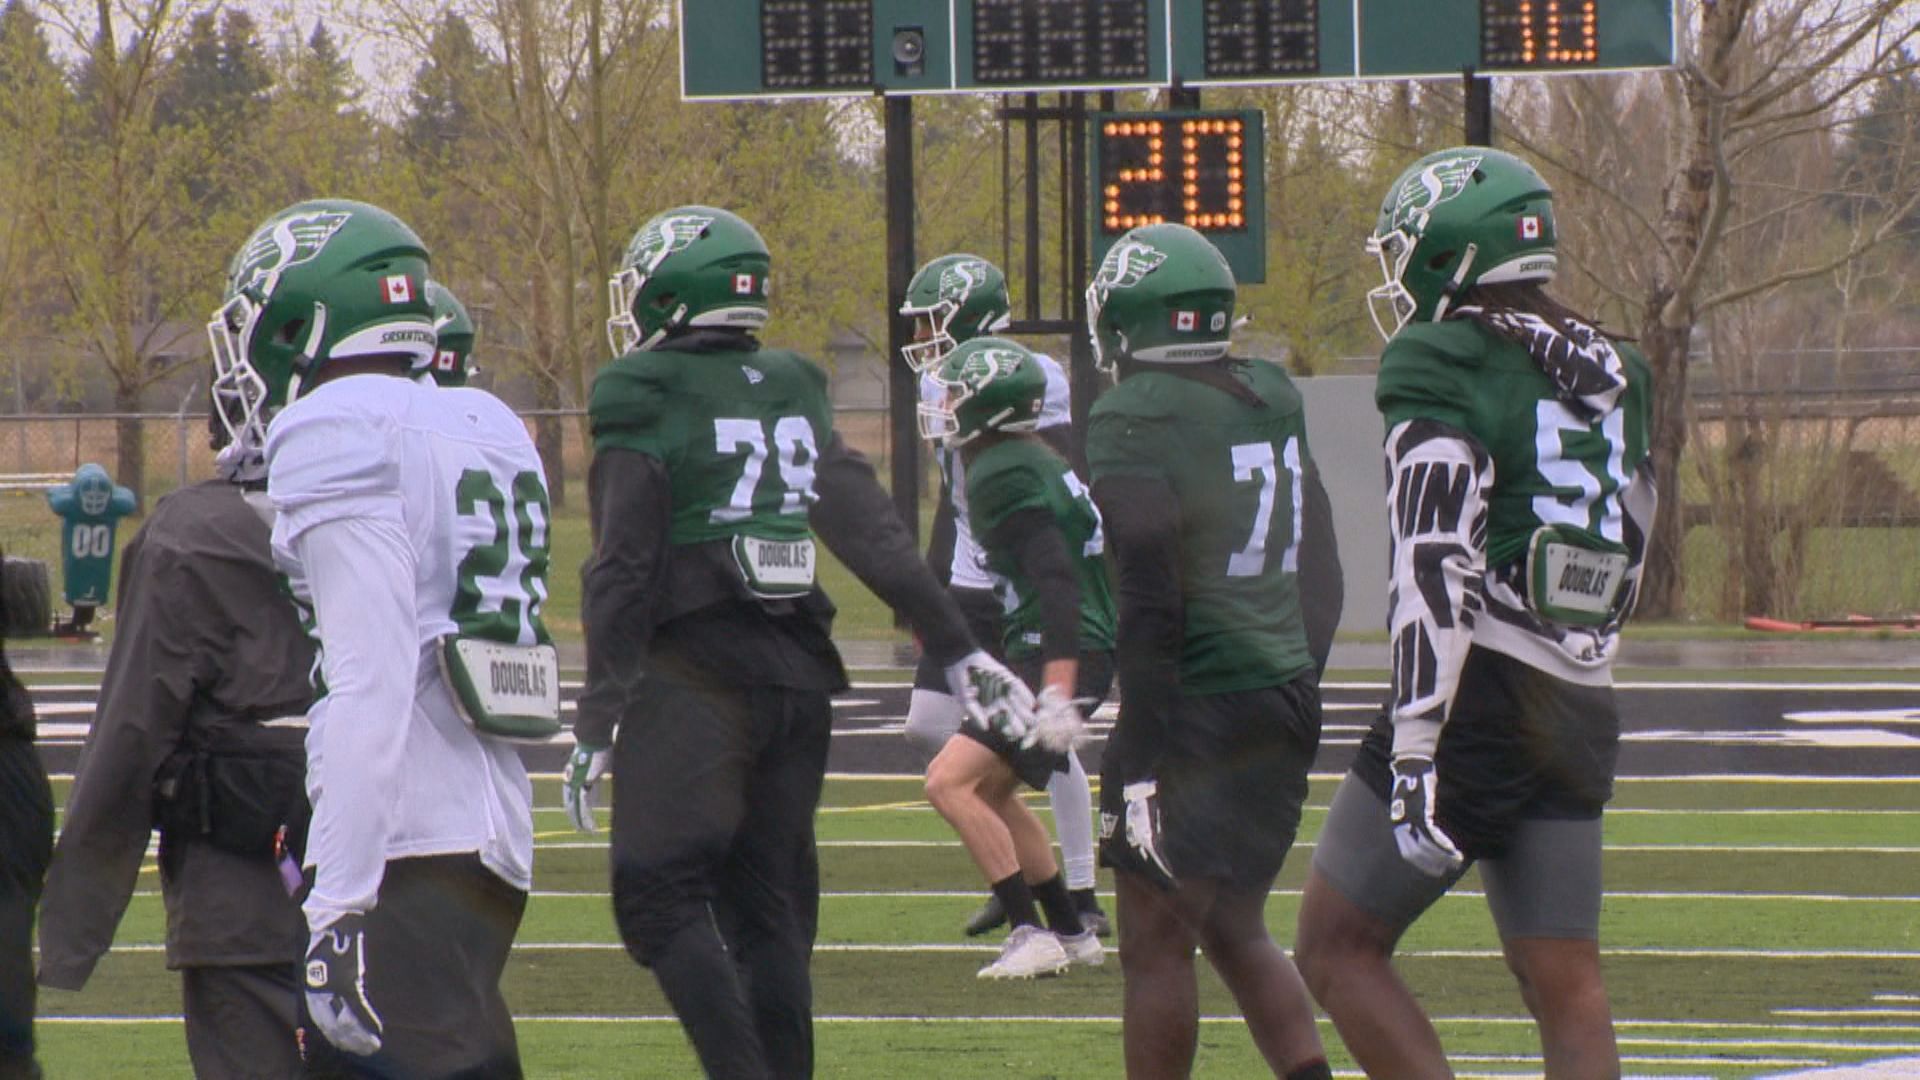 In Saskatoon, the Roughriders rookie camp concludes.